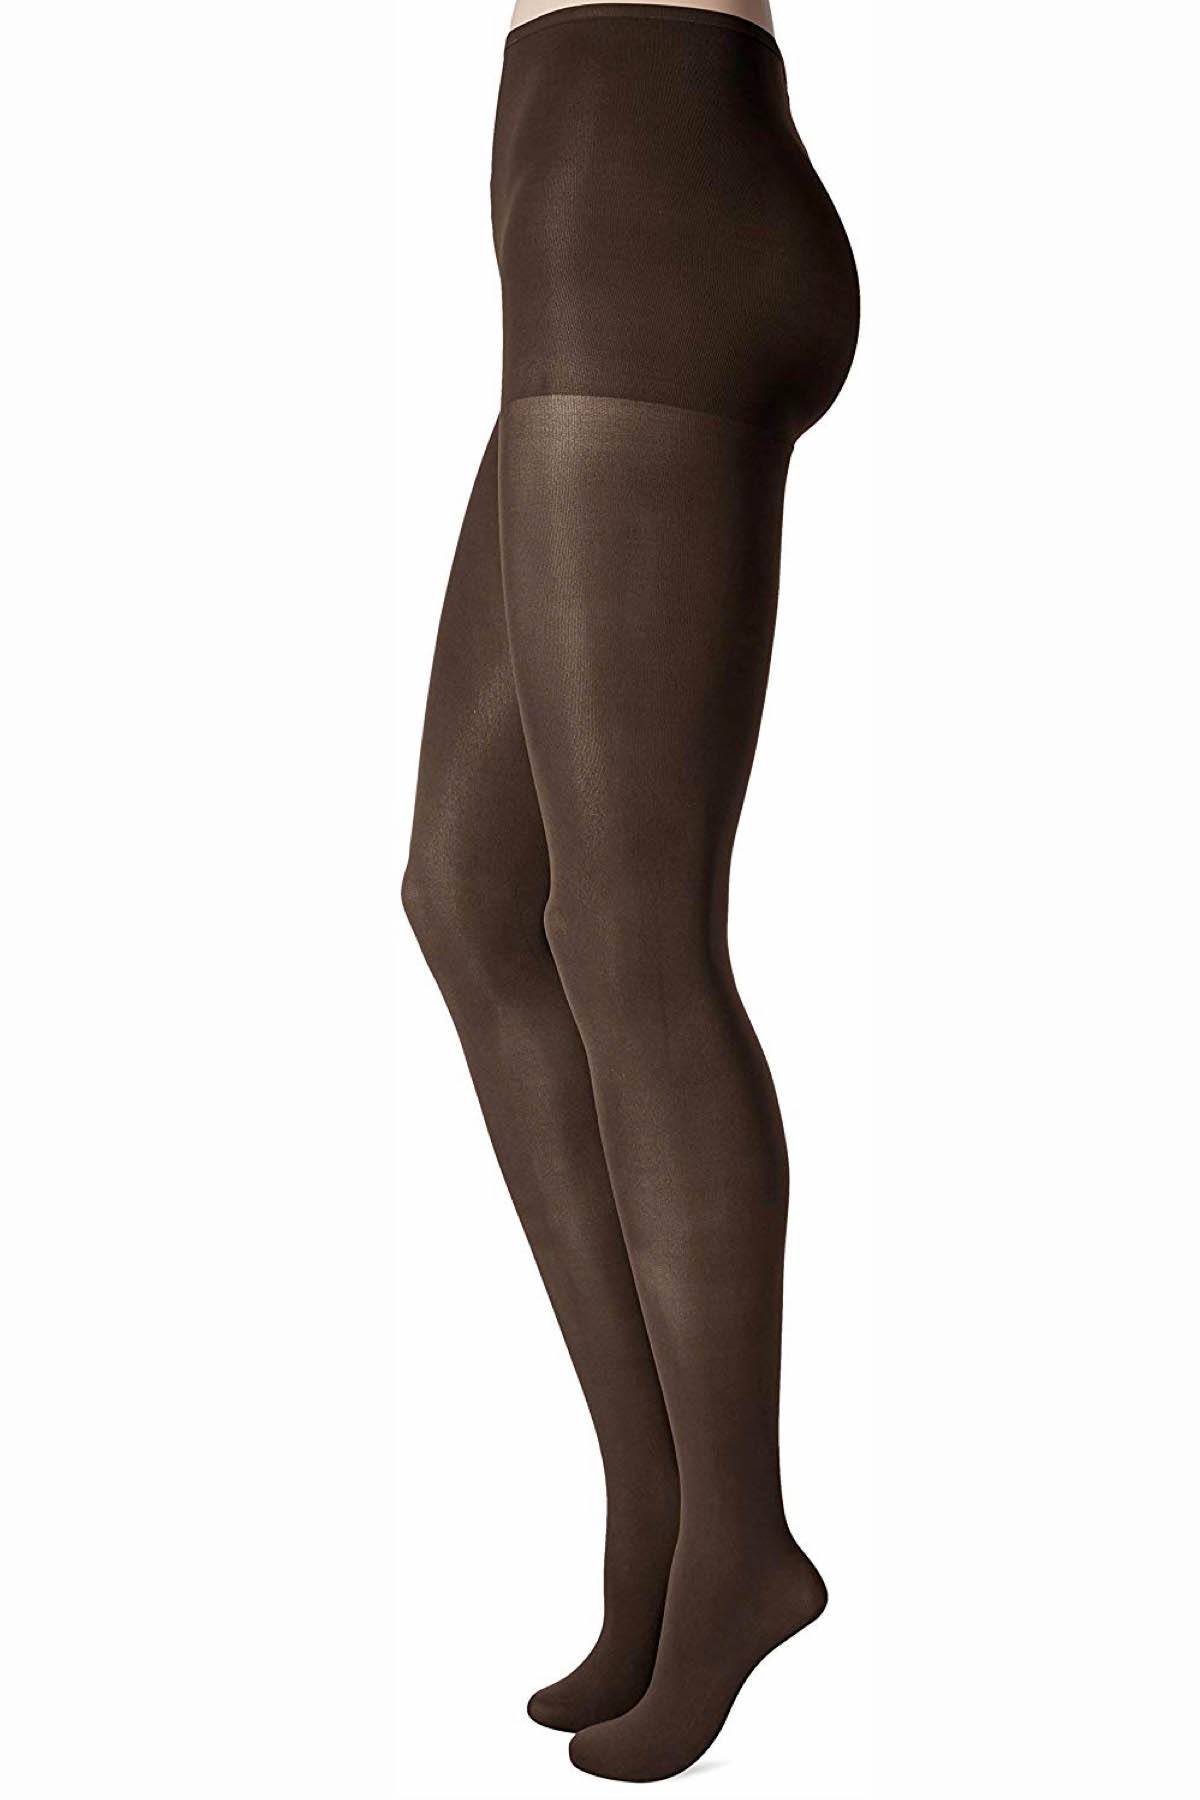 Hanes Mocha PLUS Shapes/Smoothes X-Temp Everyday Opaque Tights